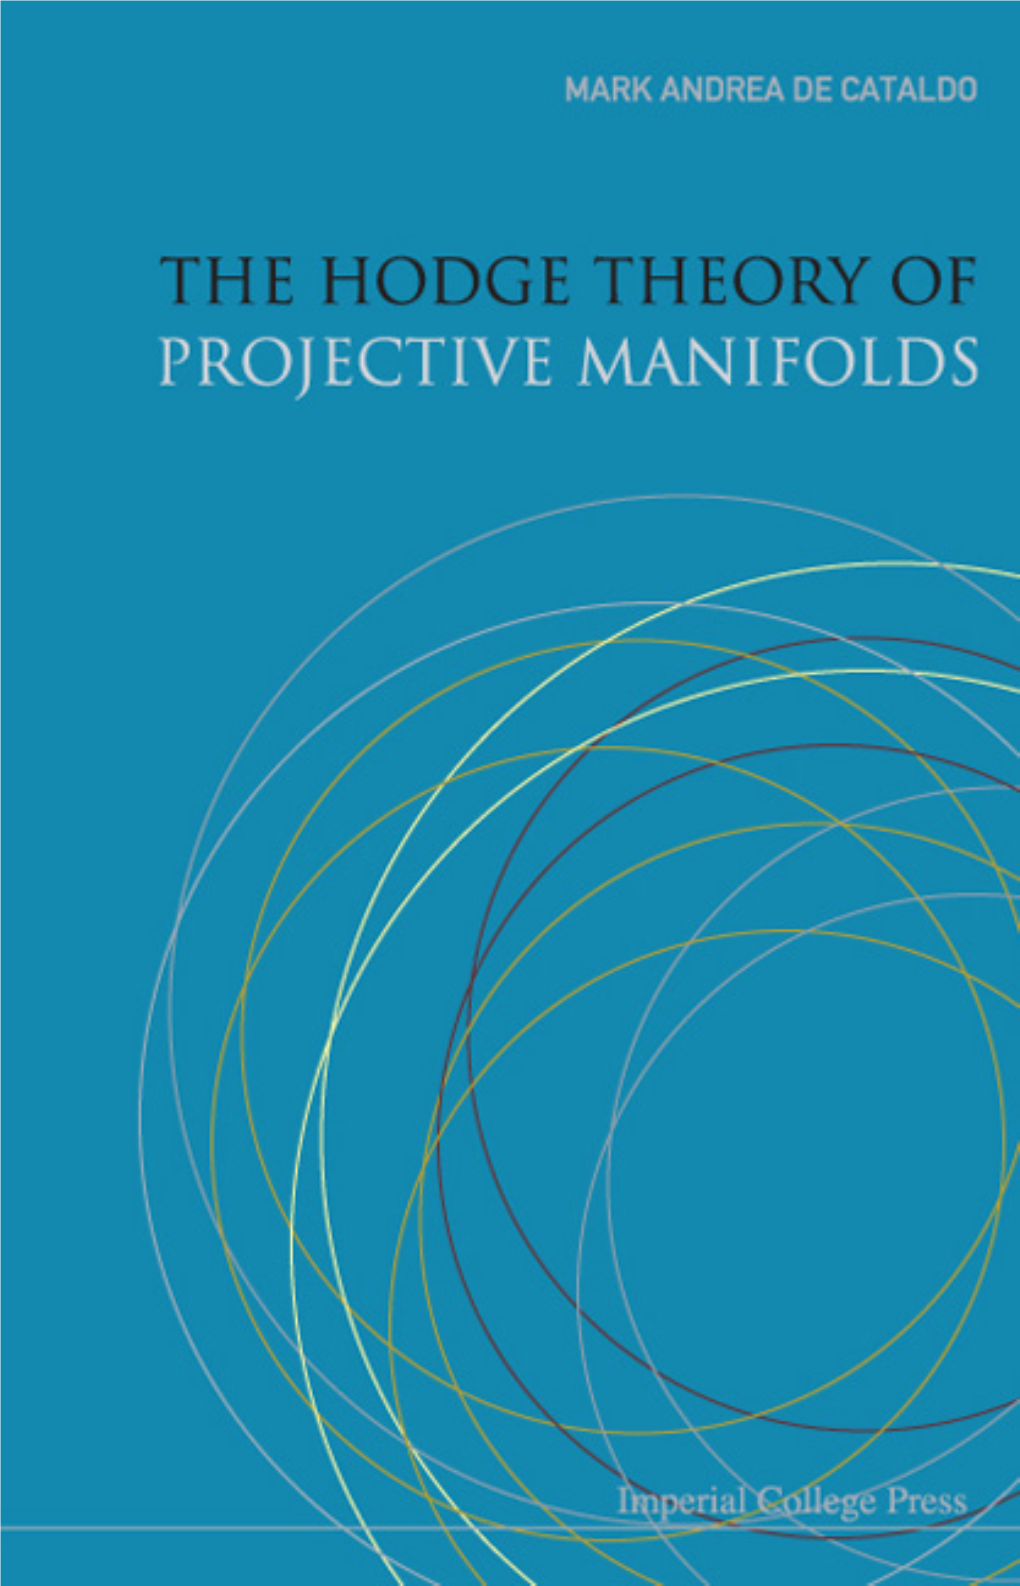 Lectures on the Hodge Theory of Projective Manifolds